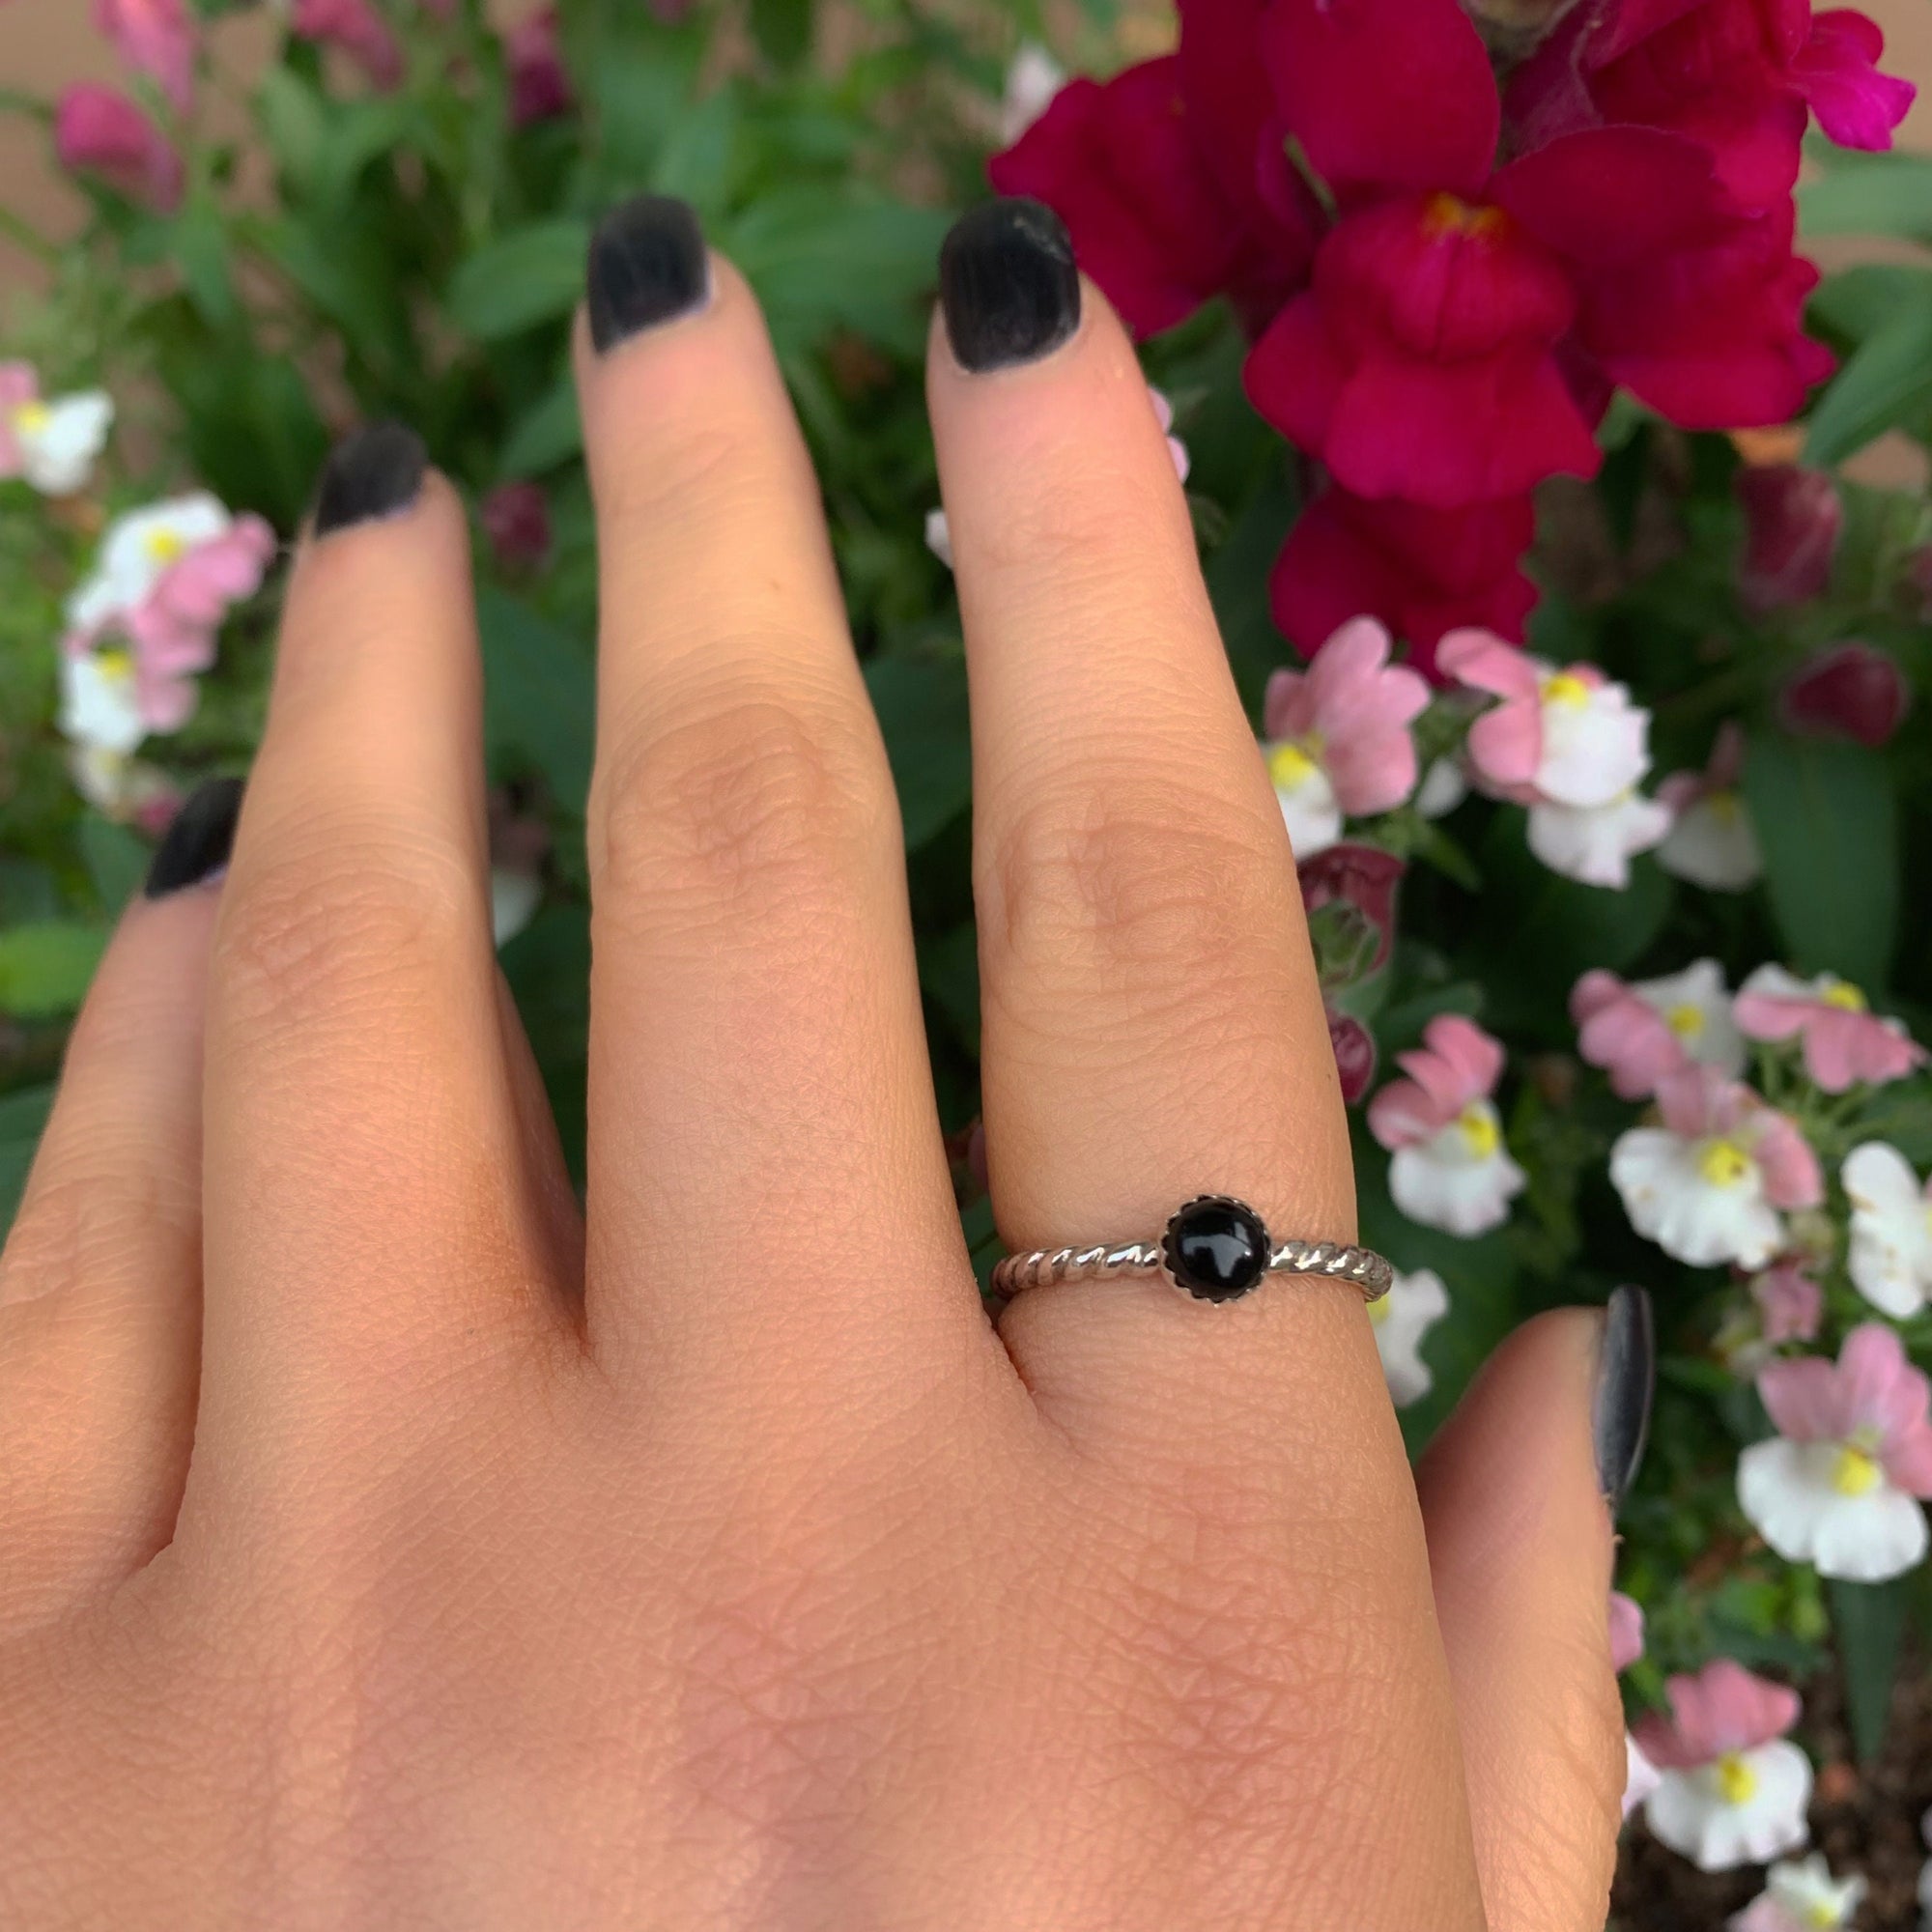 Black Onyx Twist Ring - Made to Order 